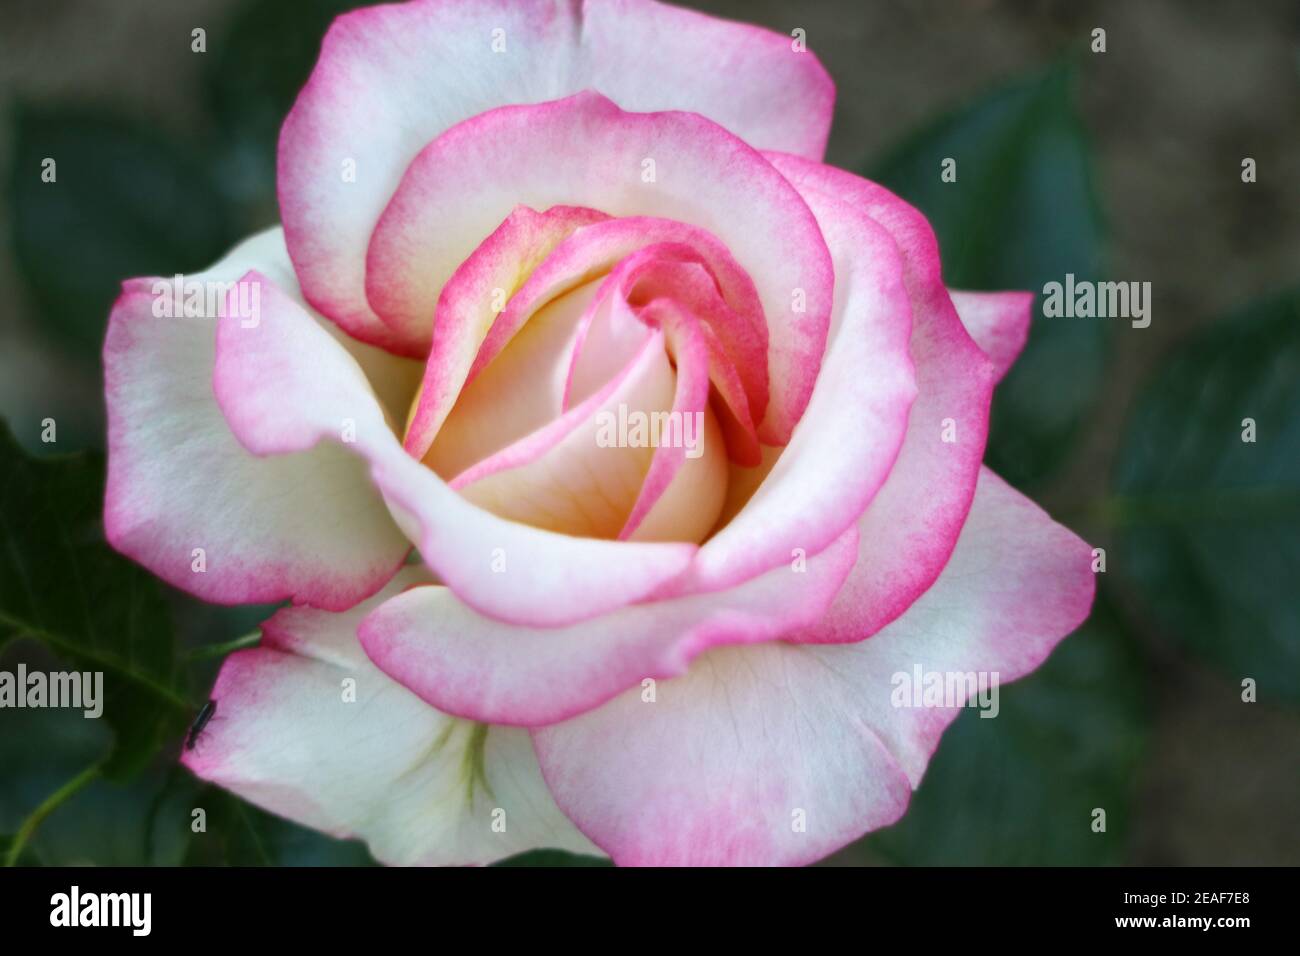 Rose with pink-white petals and green leaves, colorful rose in the garden, rose head macro, beauty in nature, floral photo, macro photography, stock Stock Photo